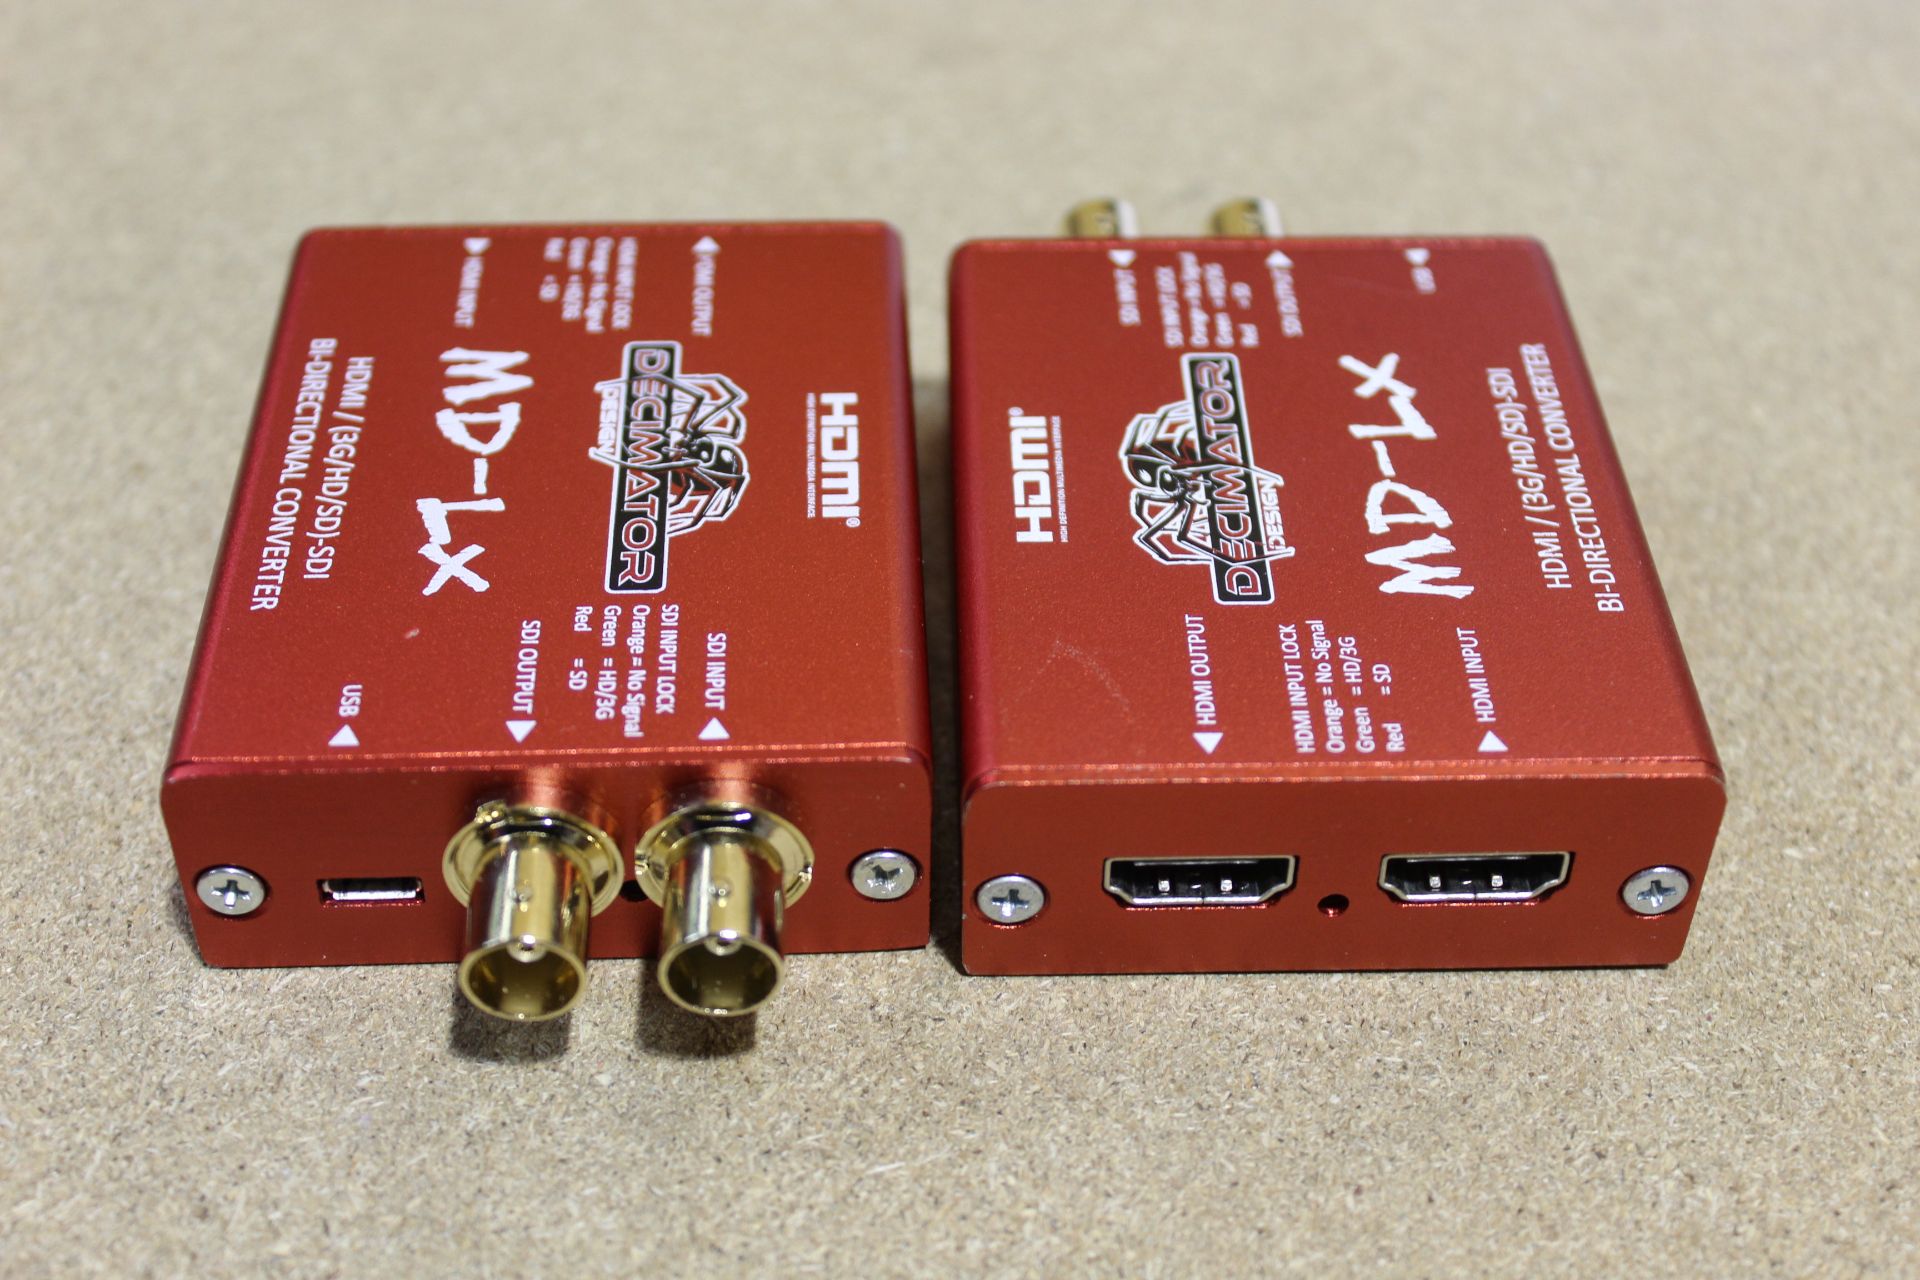 2x Decimator MD-LX HD/SDI Bi-Directional Converters each with 1x PSU in carry case (Each Purchased - Image 2 of 2